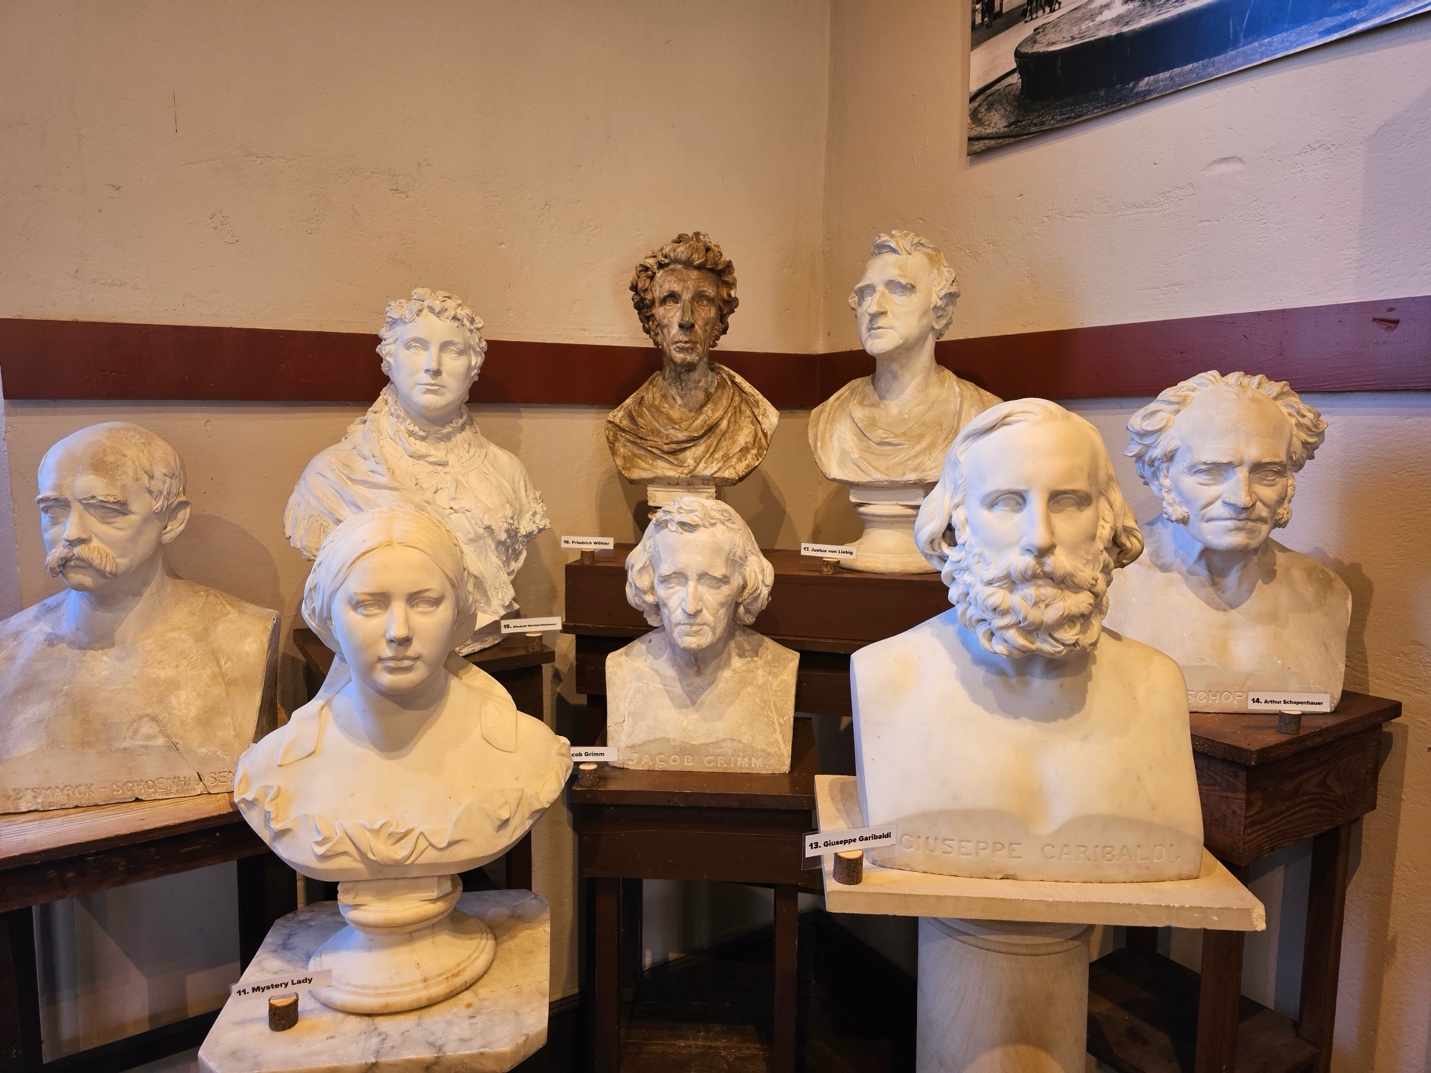 A group of statues on display

Description automatically generated